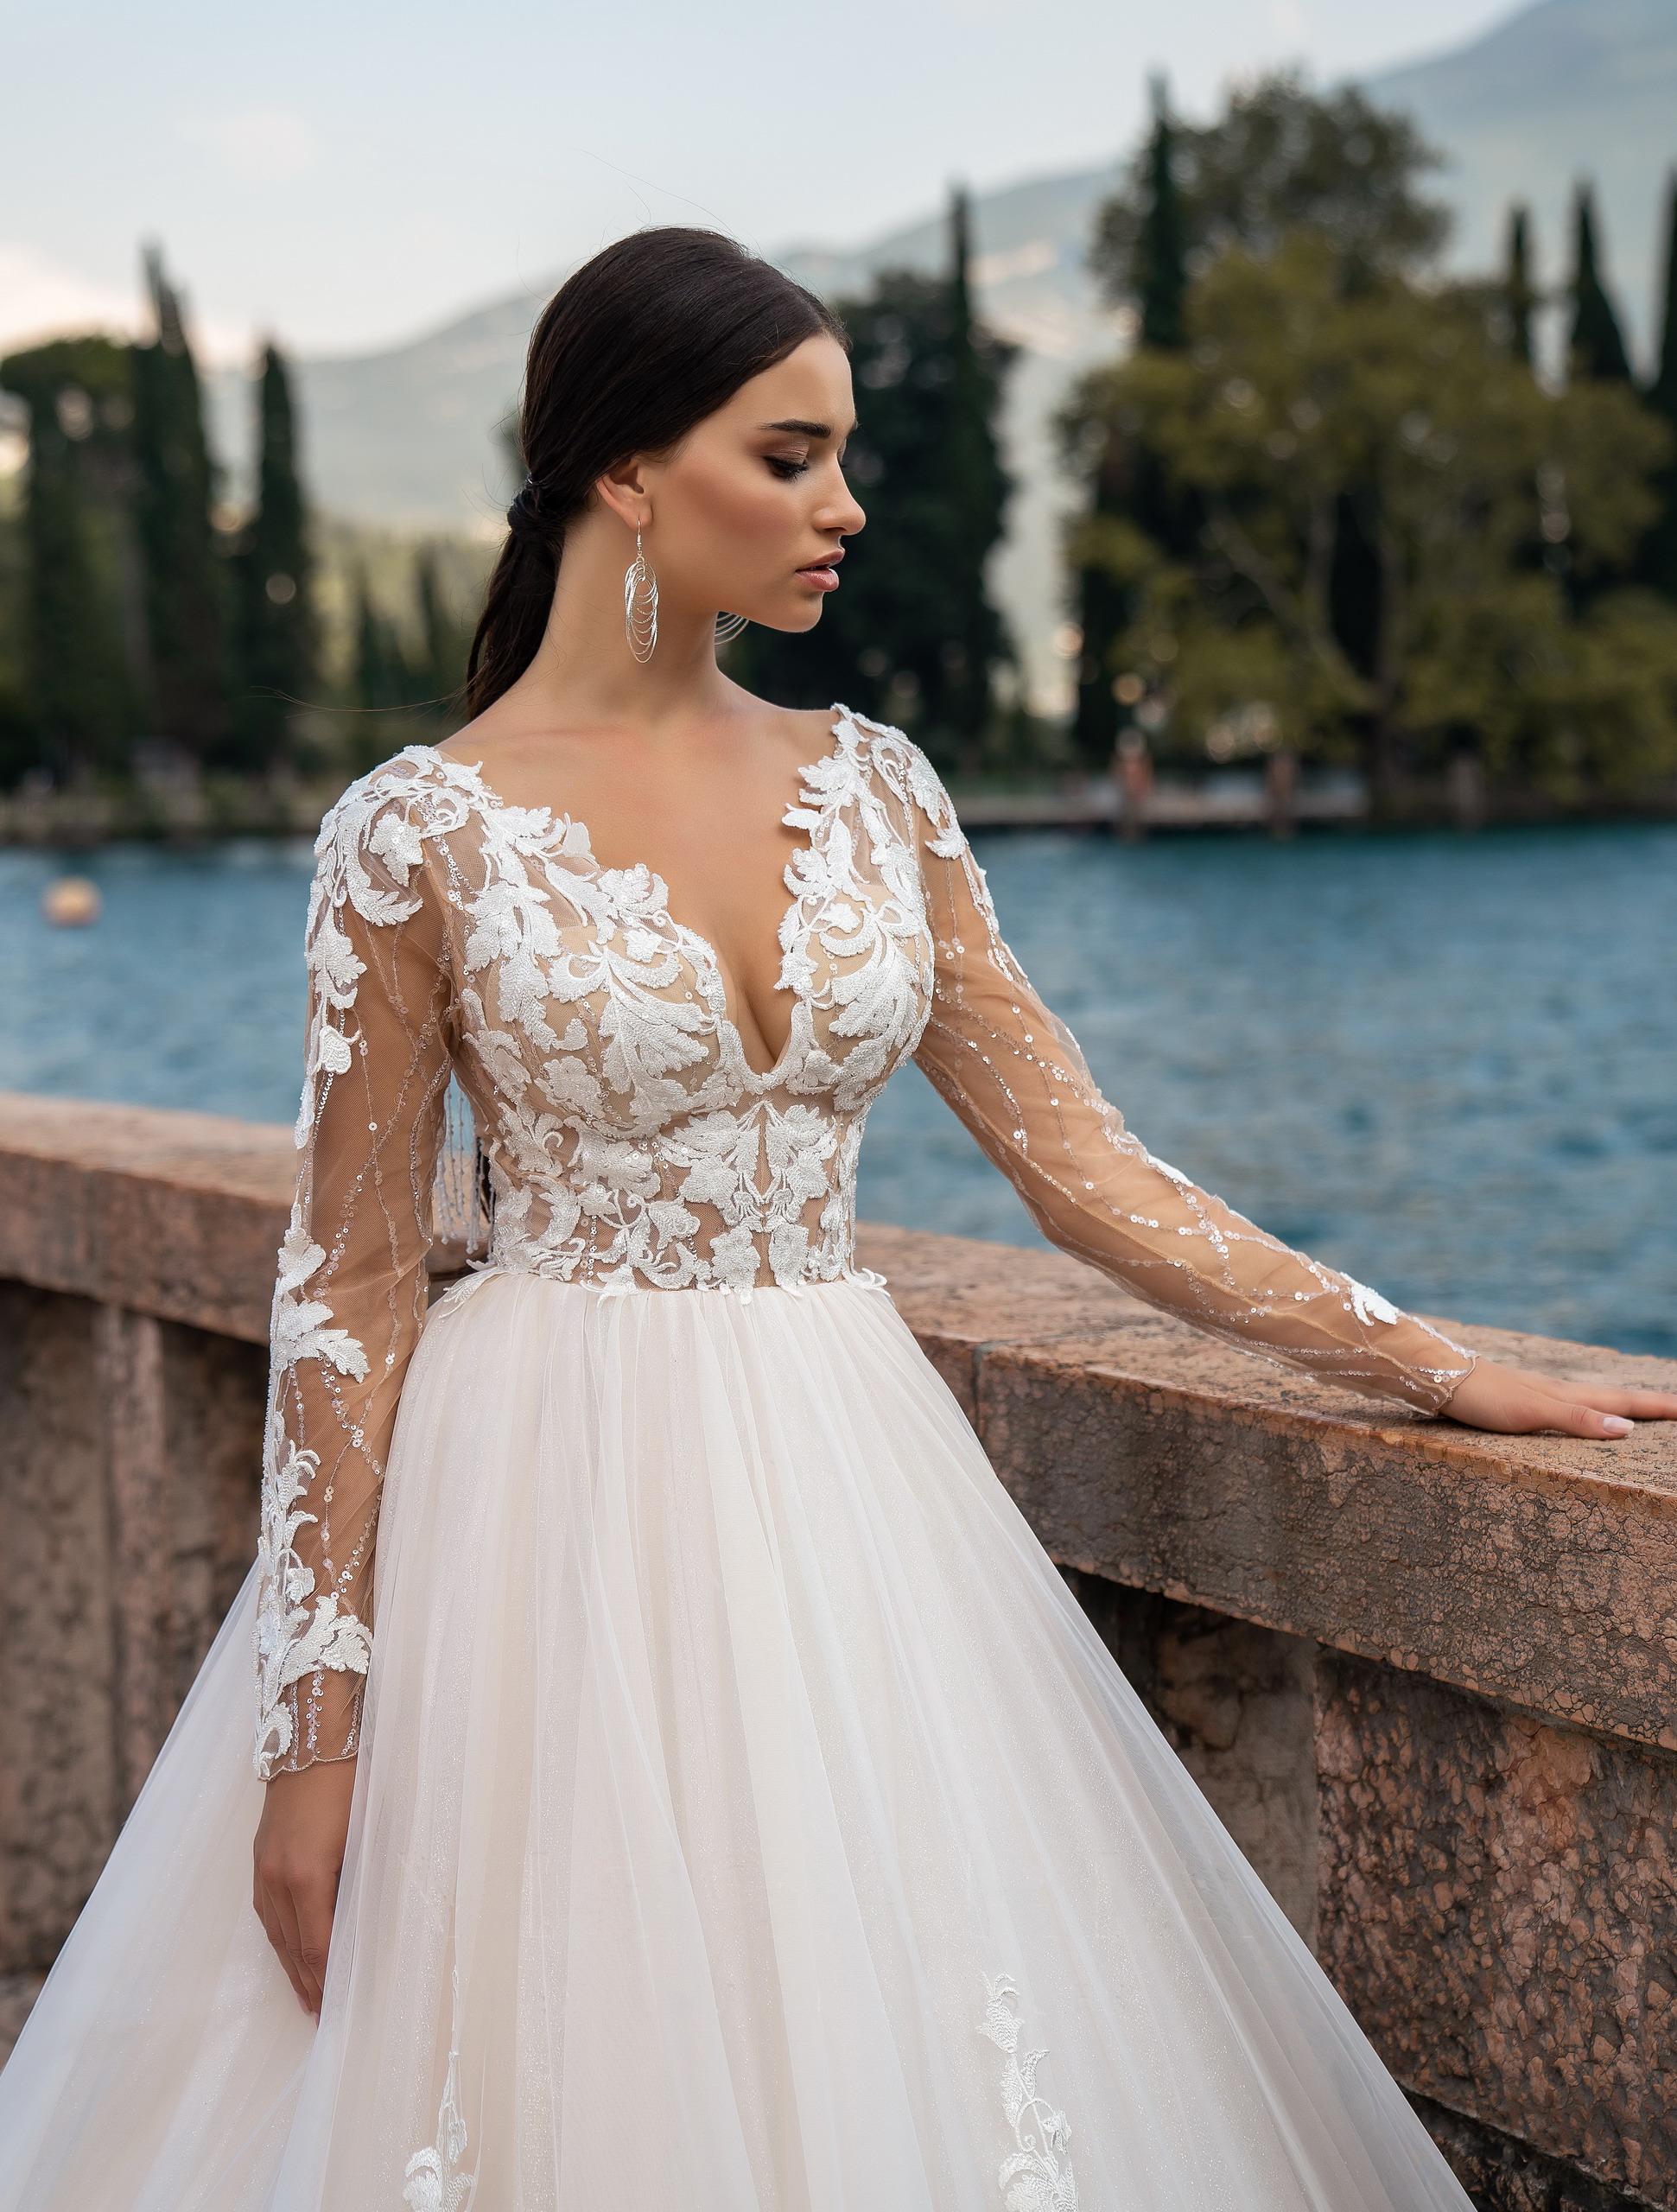 Paisley / Ball Gown Wedding Dress With Long Sleeves